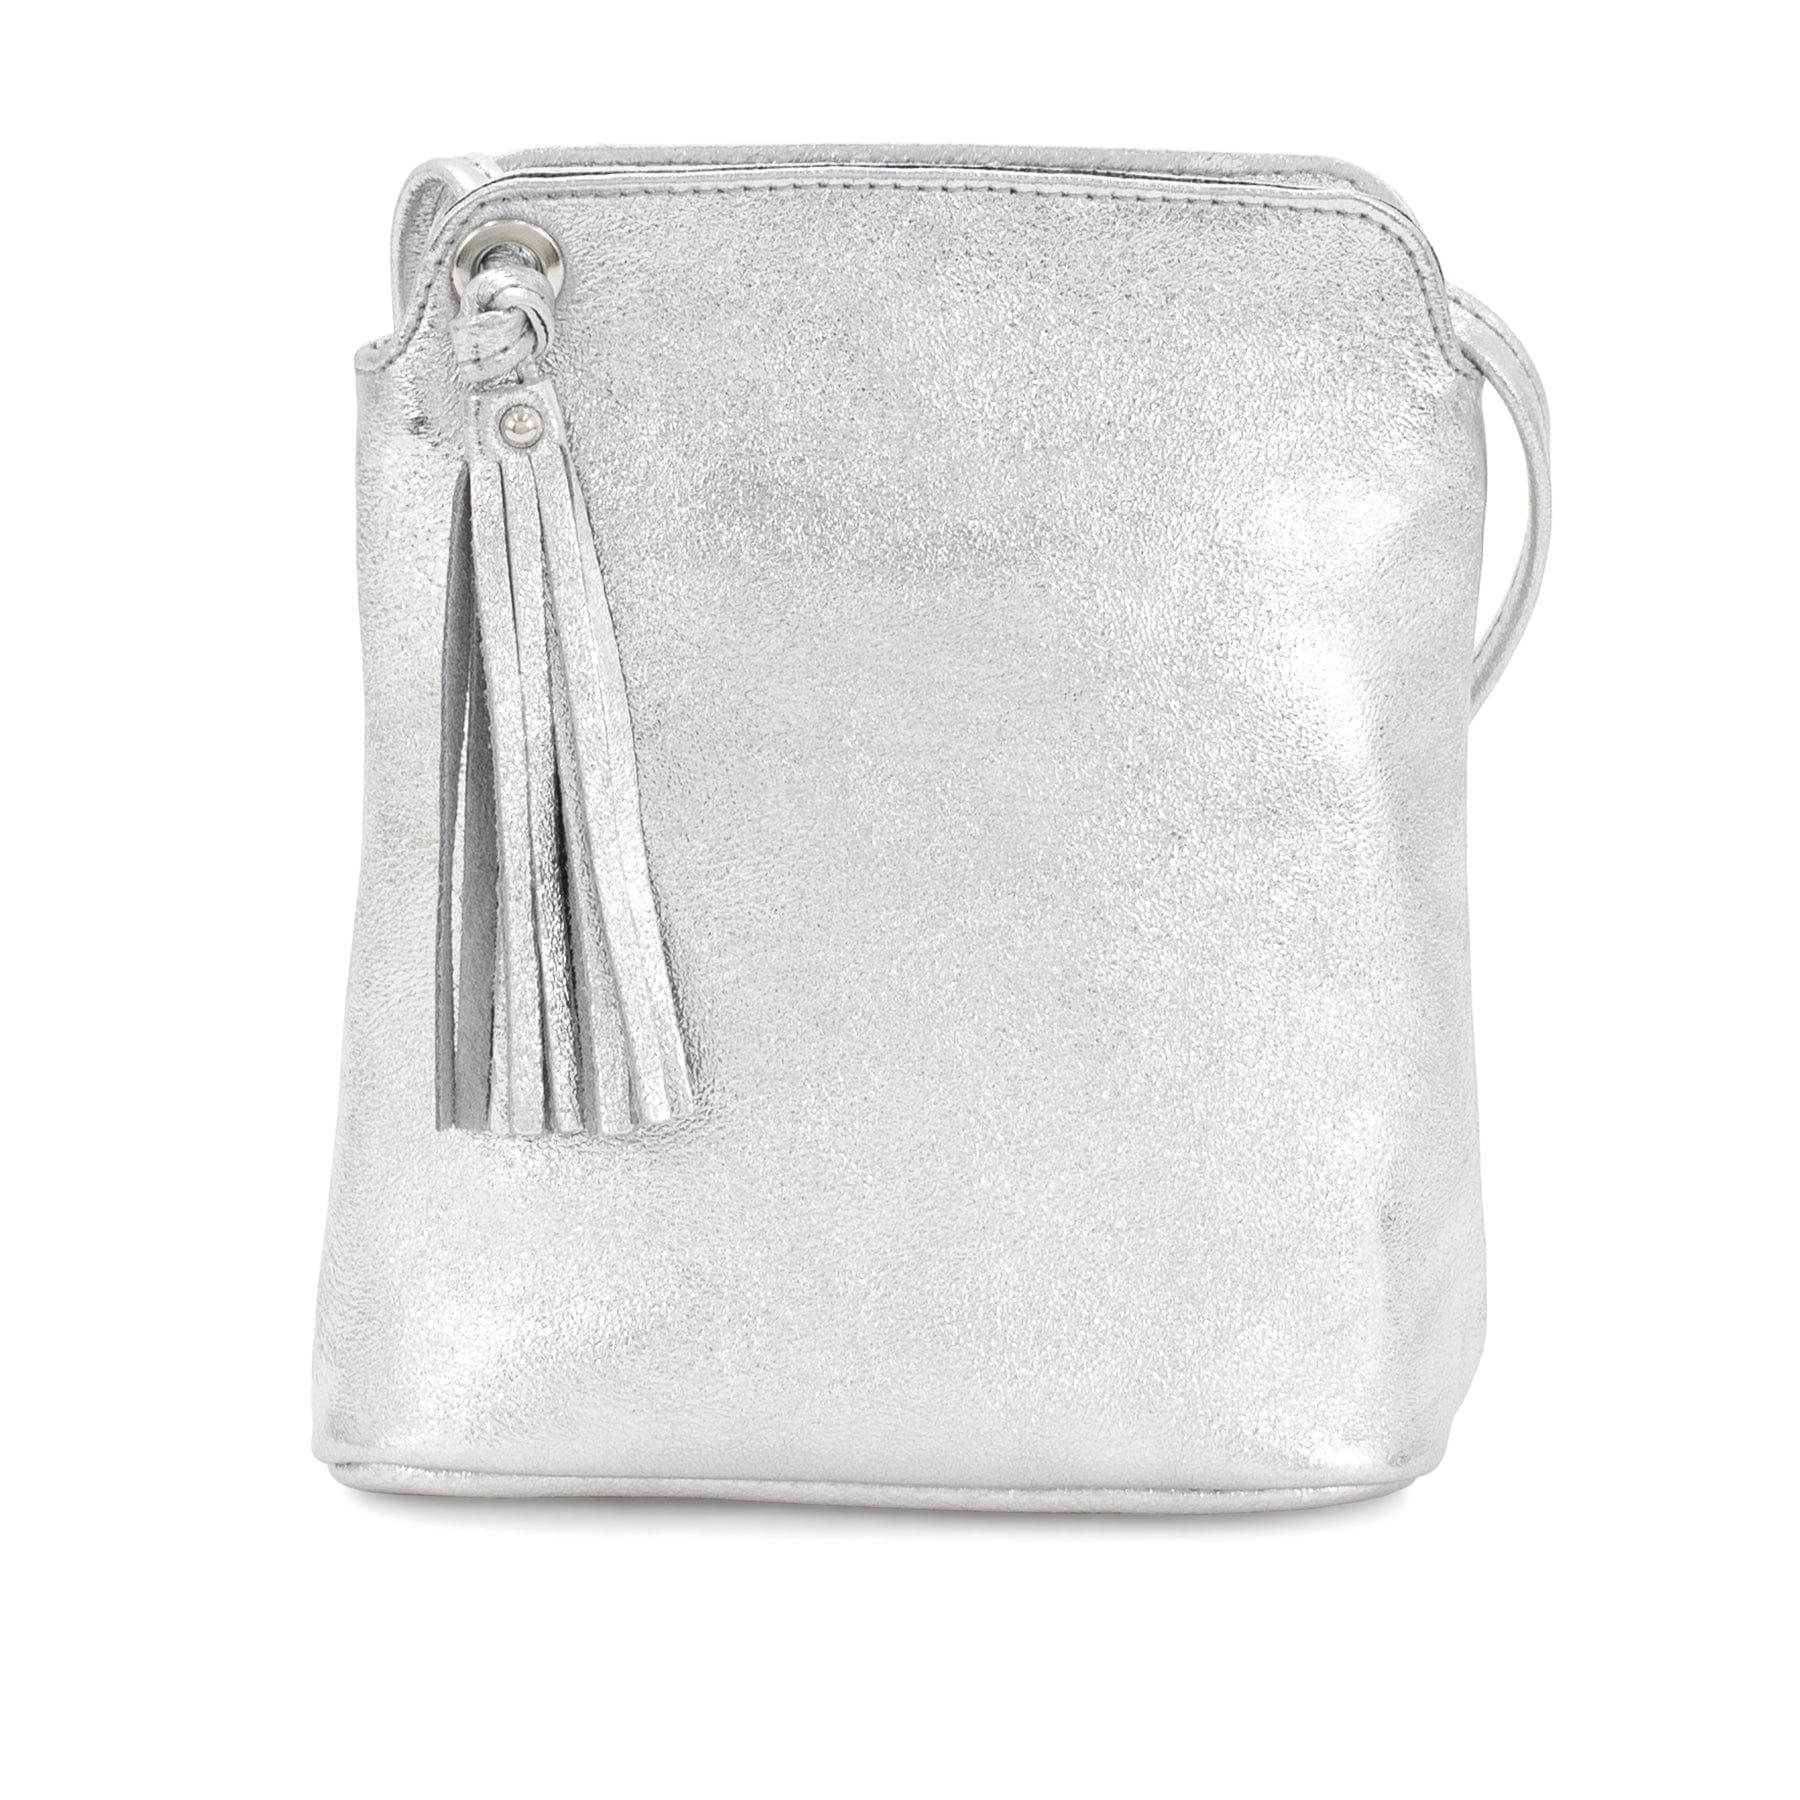 lusciousscarves Silver Italian Leather Small Crossbody Bag / Handbag with Tassel , Available in 11 Colours.